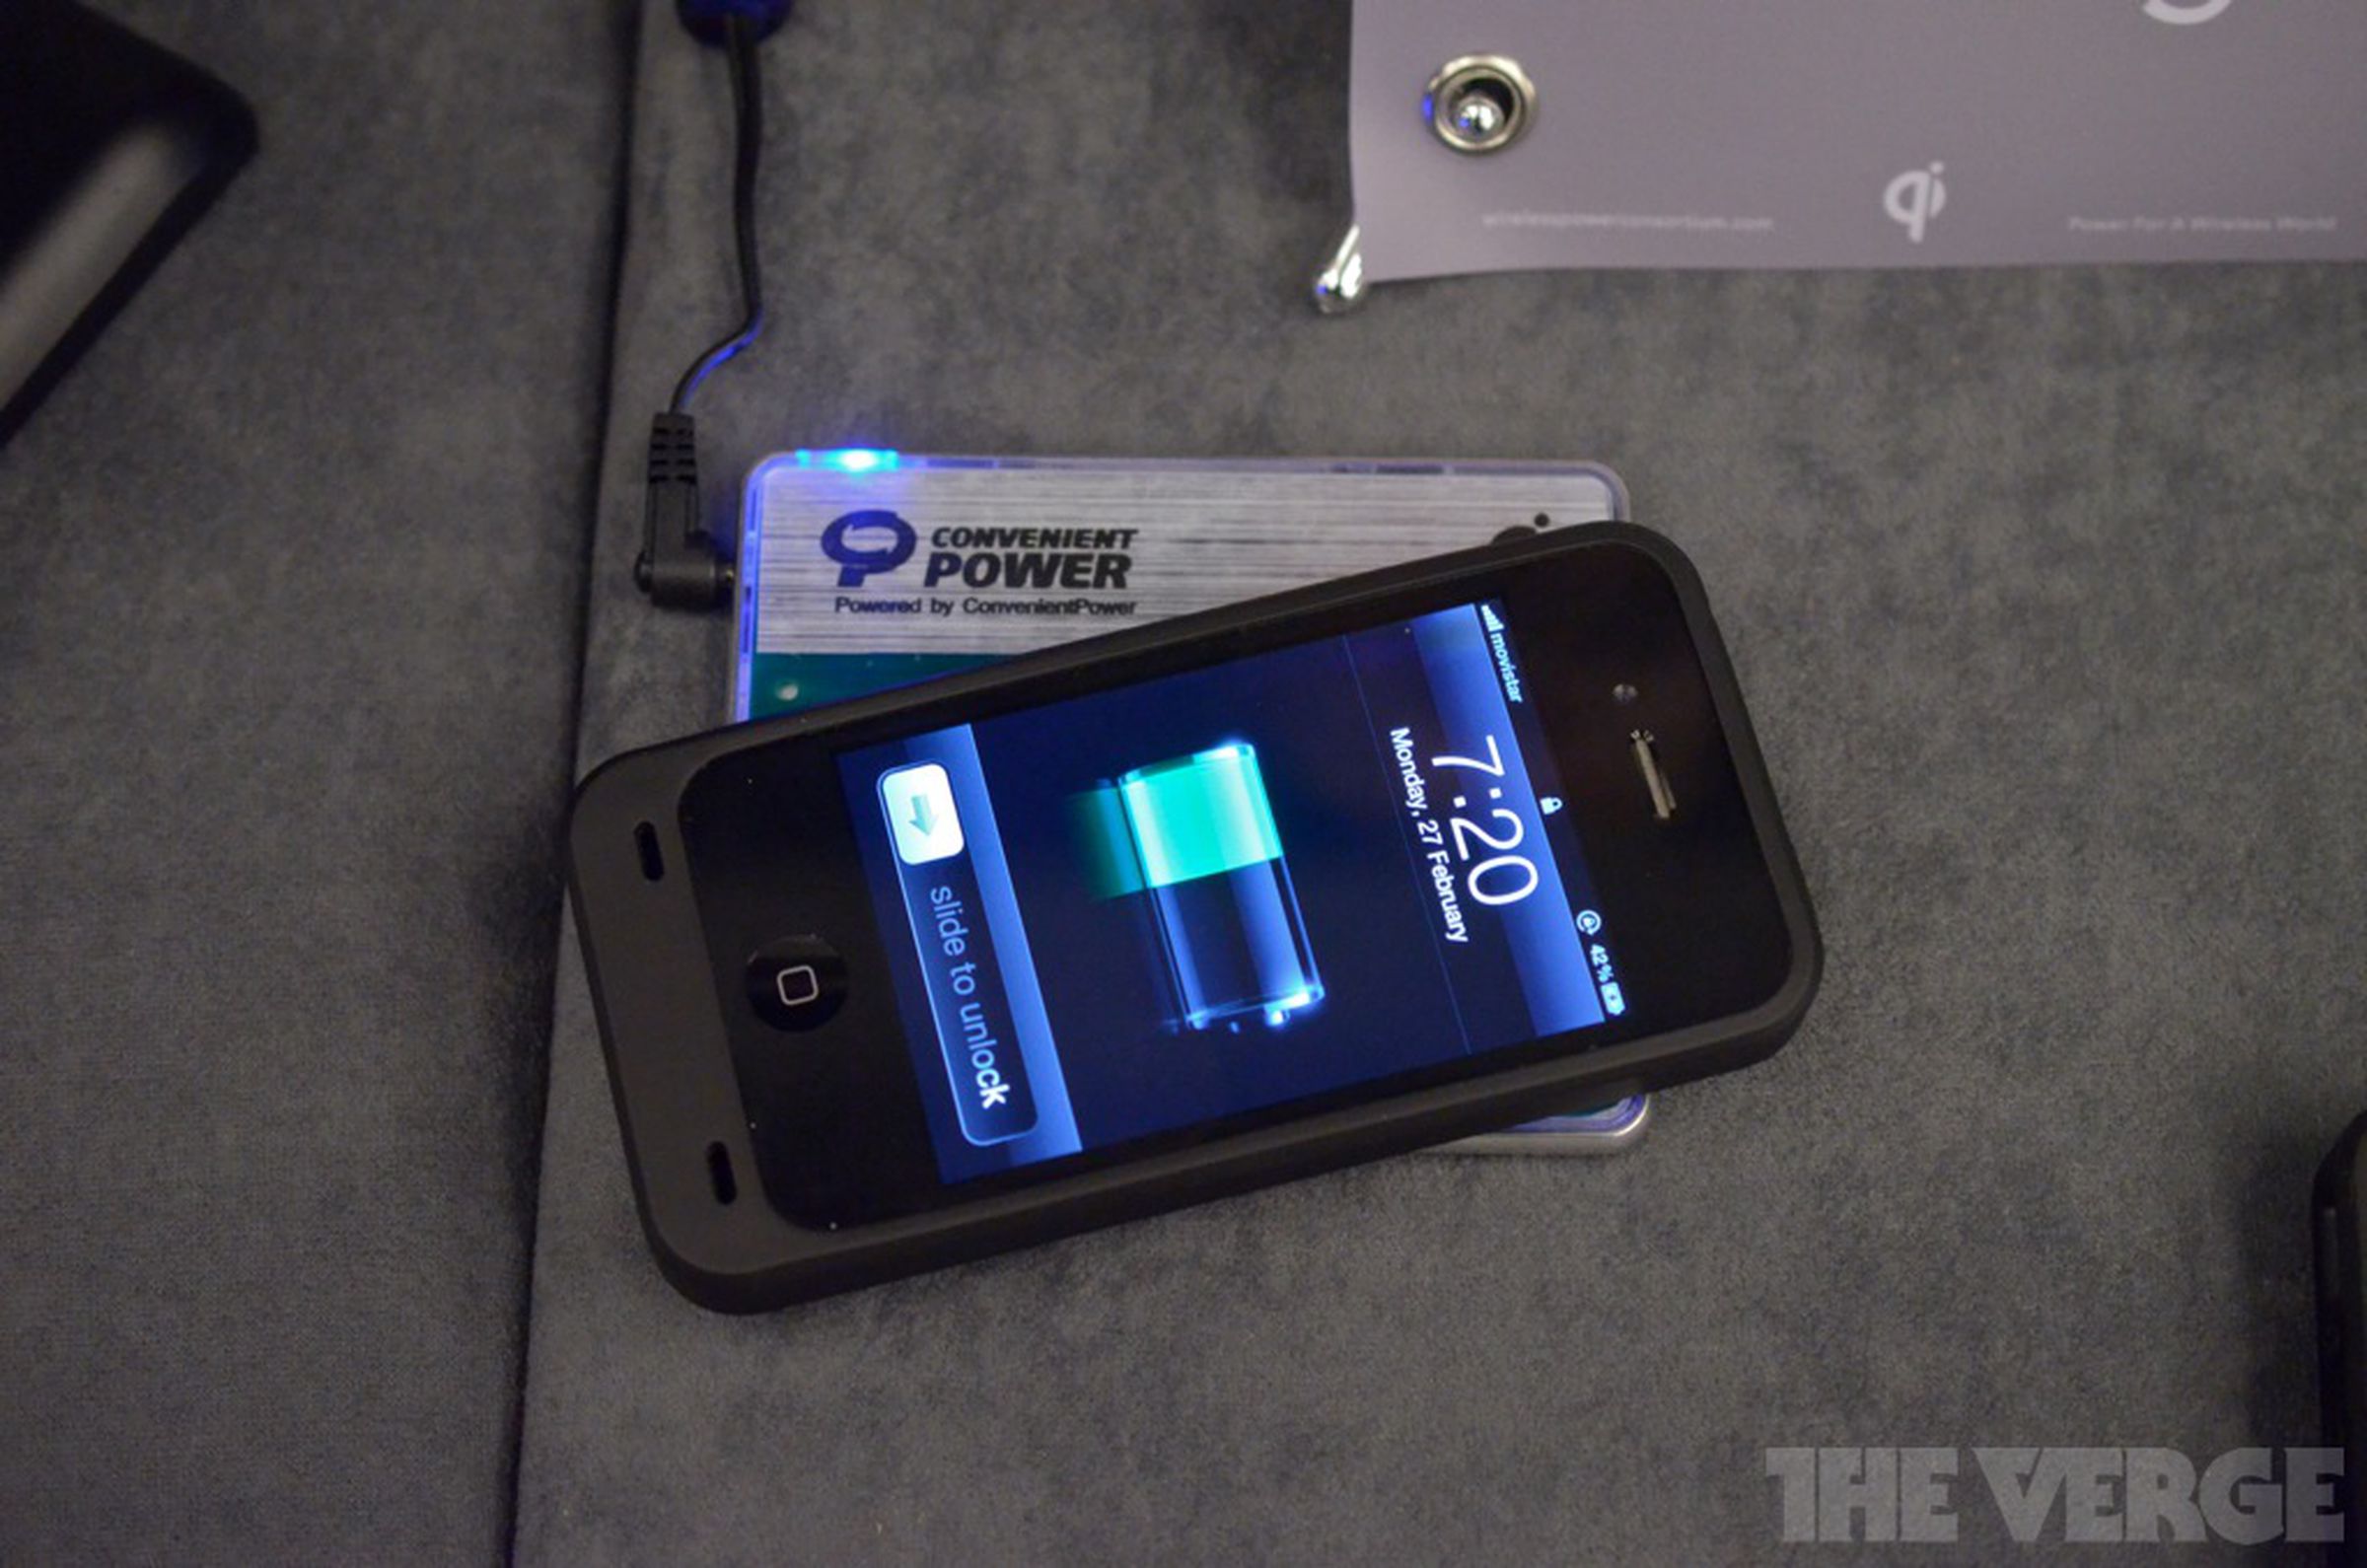 Qi wireless charging at Mobile World Congress 2012